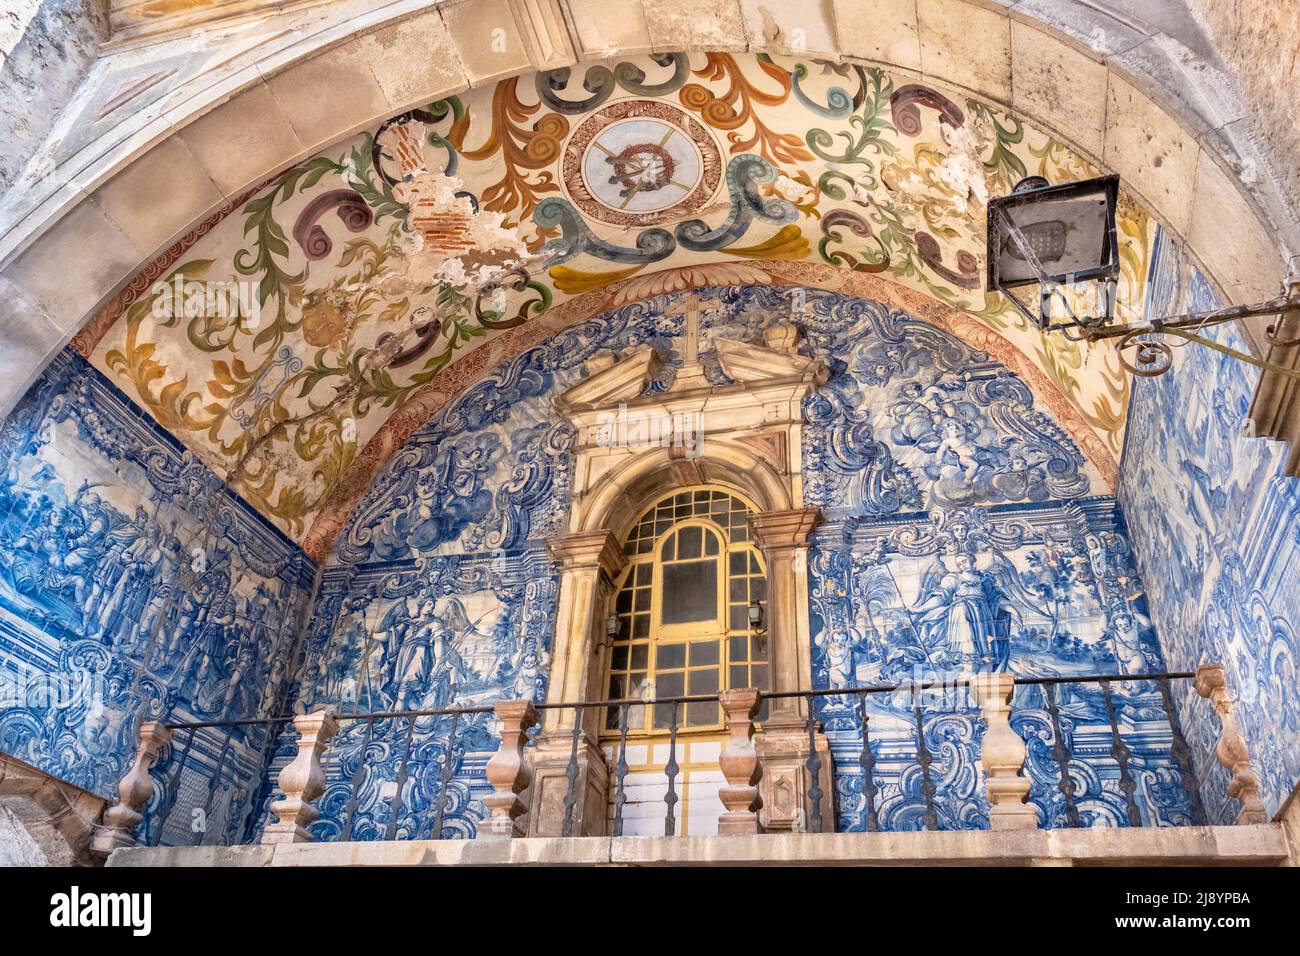 View to Azulejo and decorated ceiling of Porta da Vila the main entrance to medieval Obidos, Portugal Stock Photo